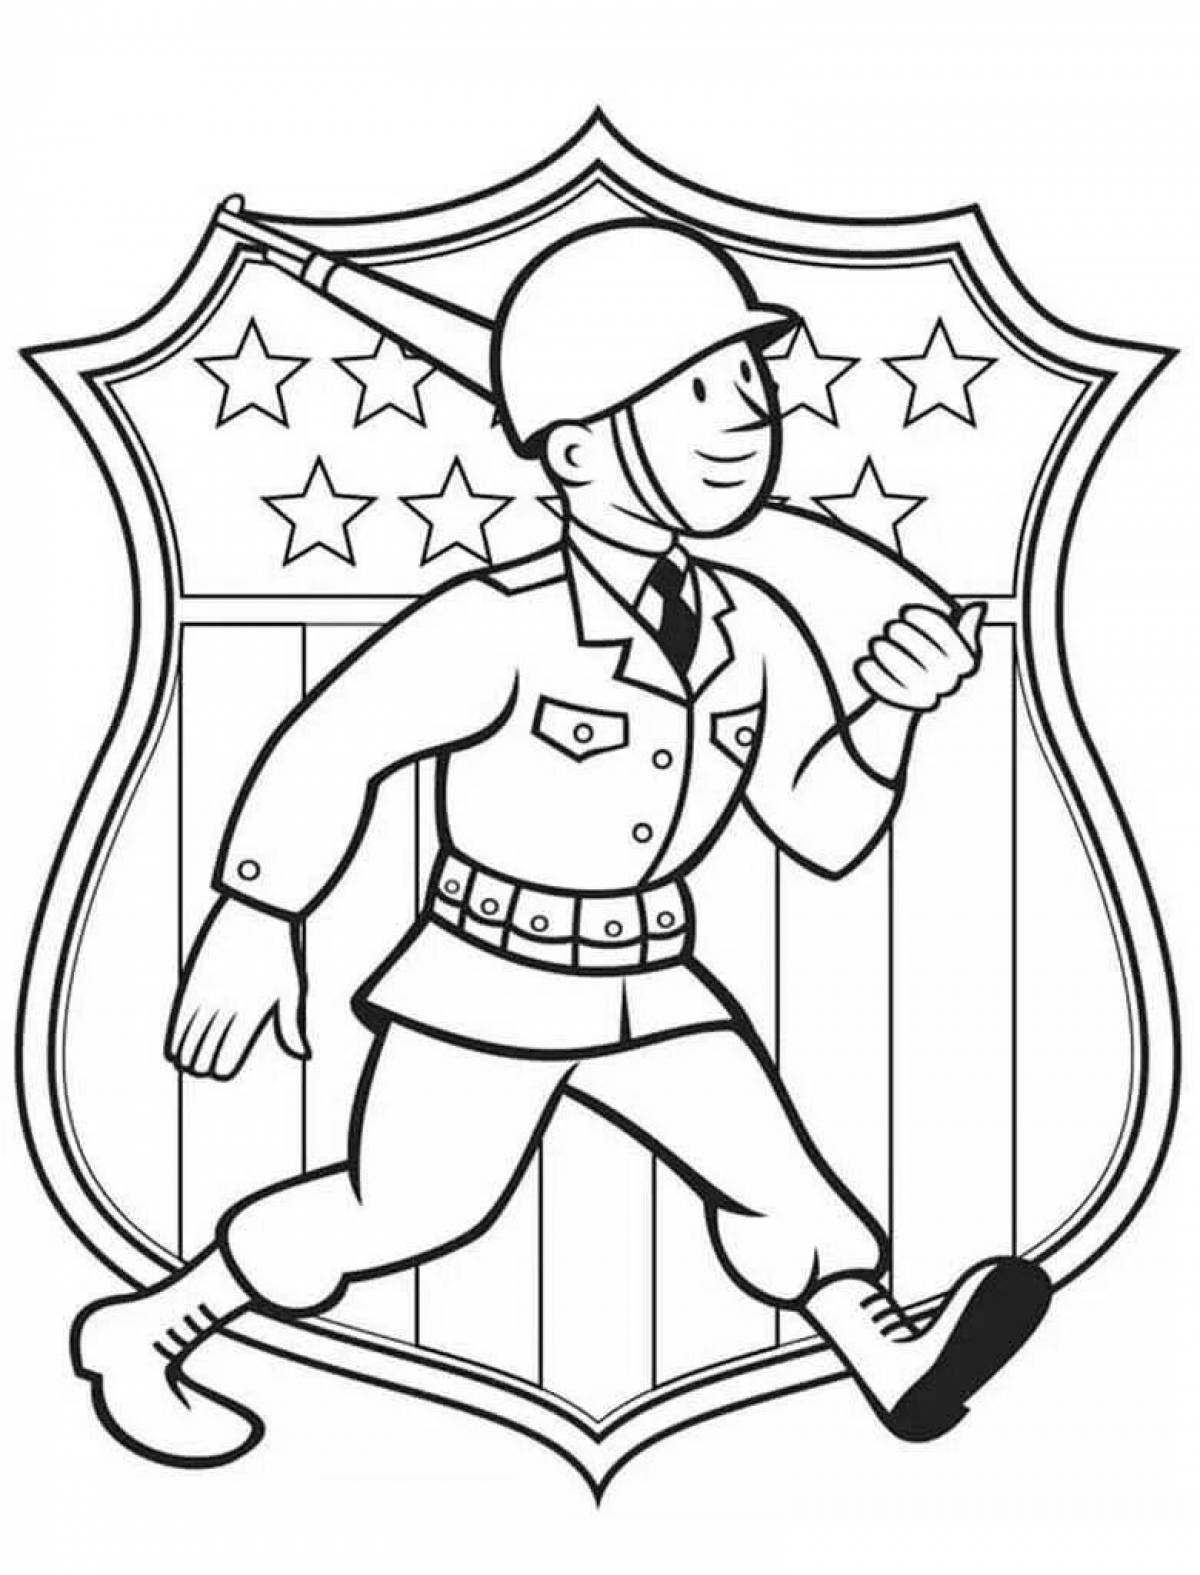 Glowing defender of the fatherland coloring page